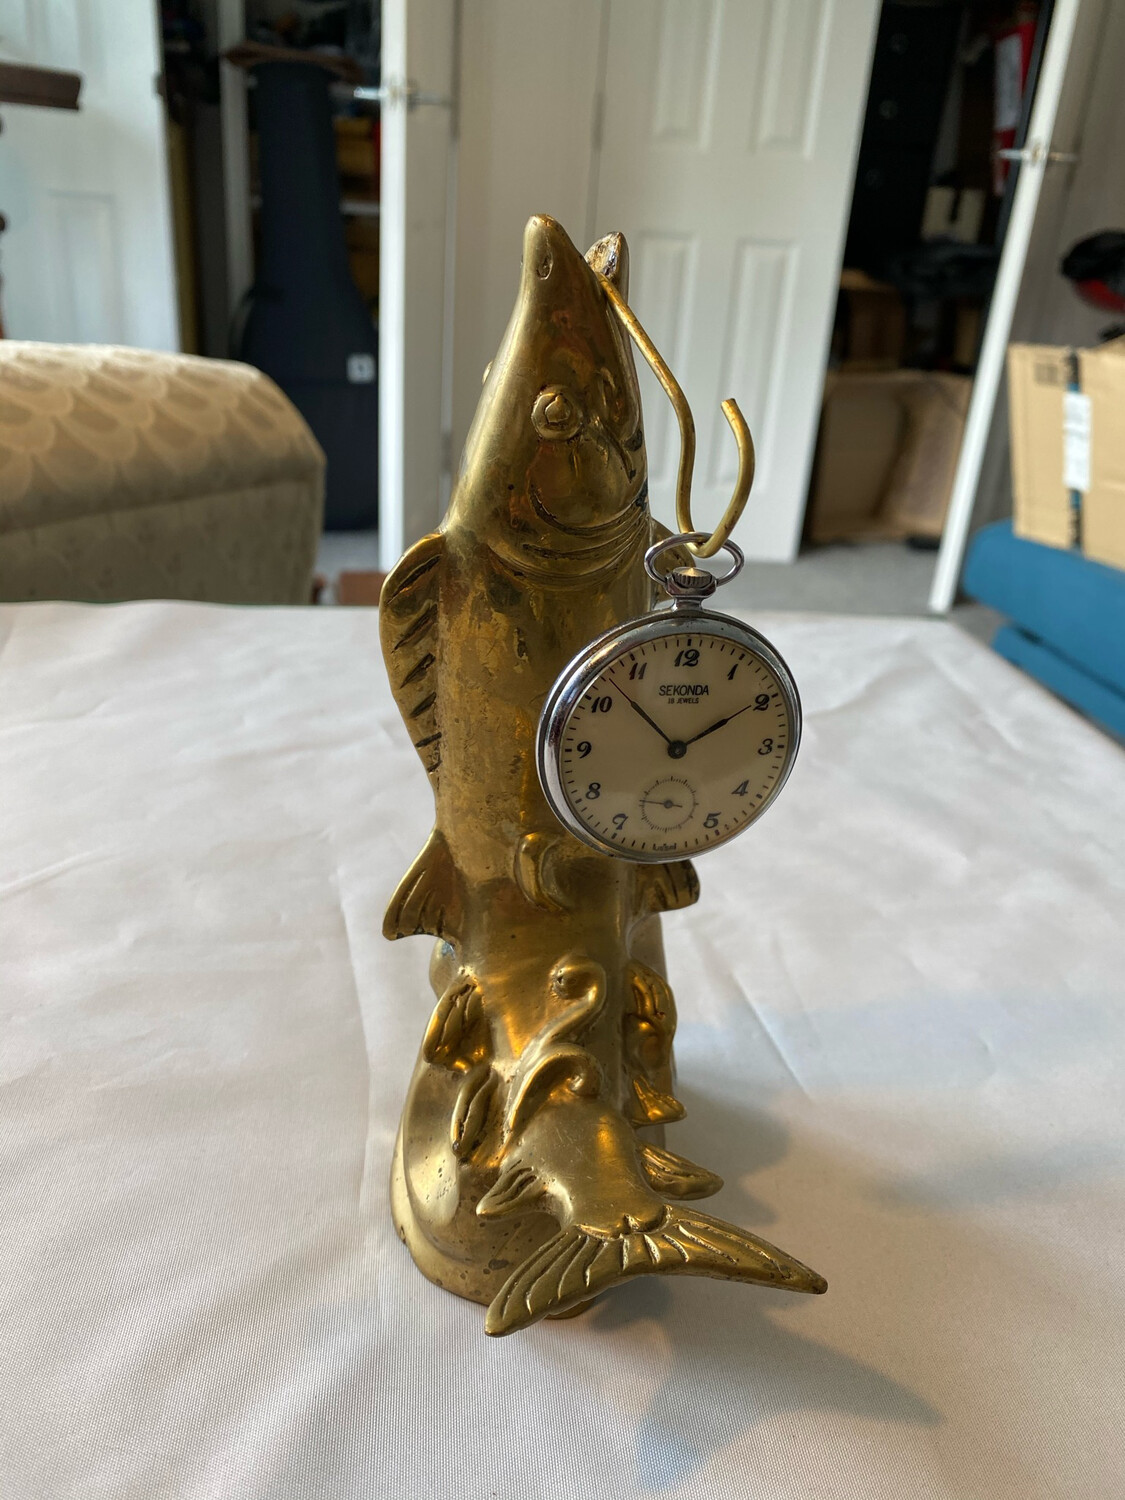 Brass pocket watch stand in style of fish - watch not included